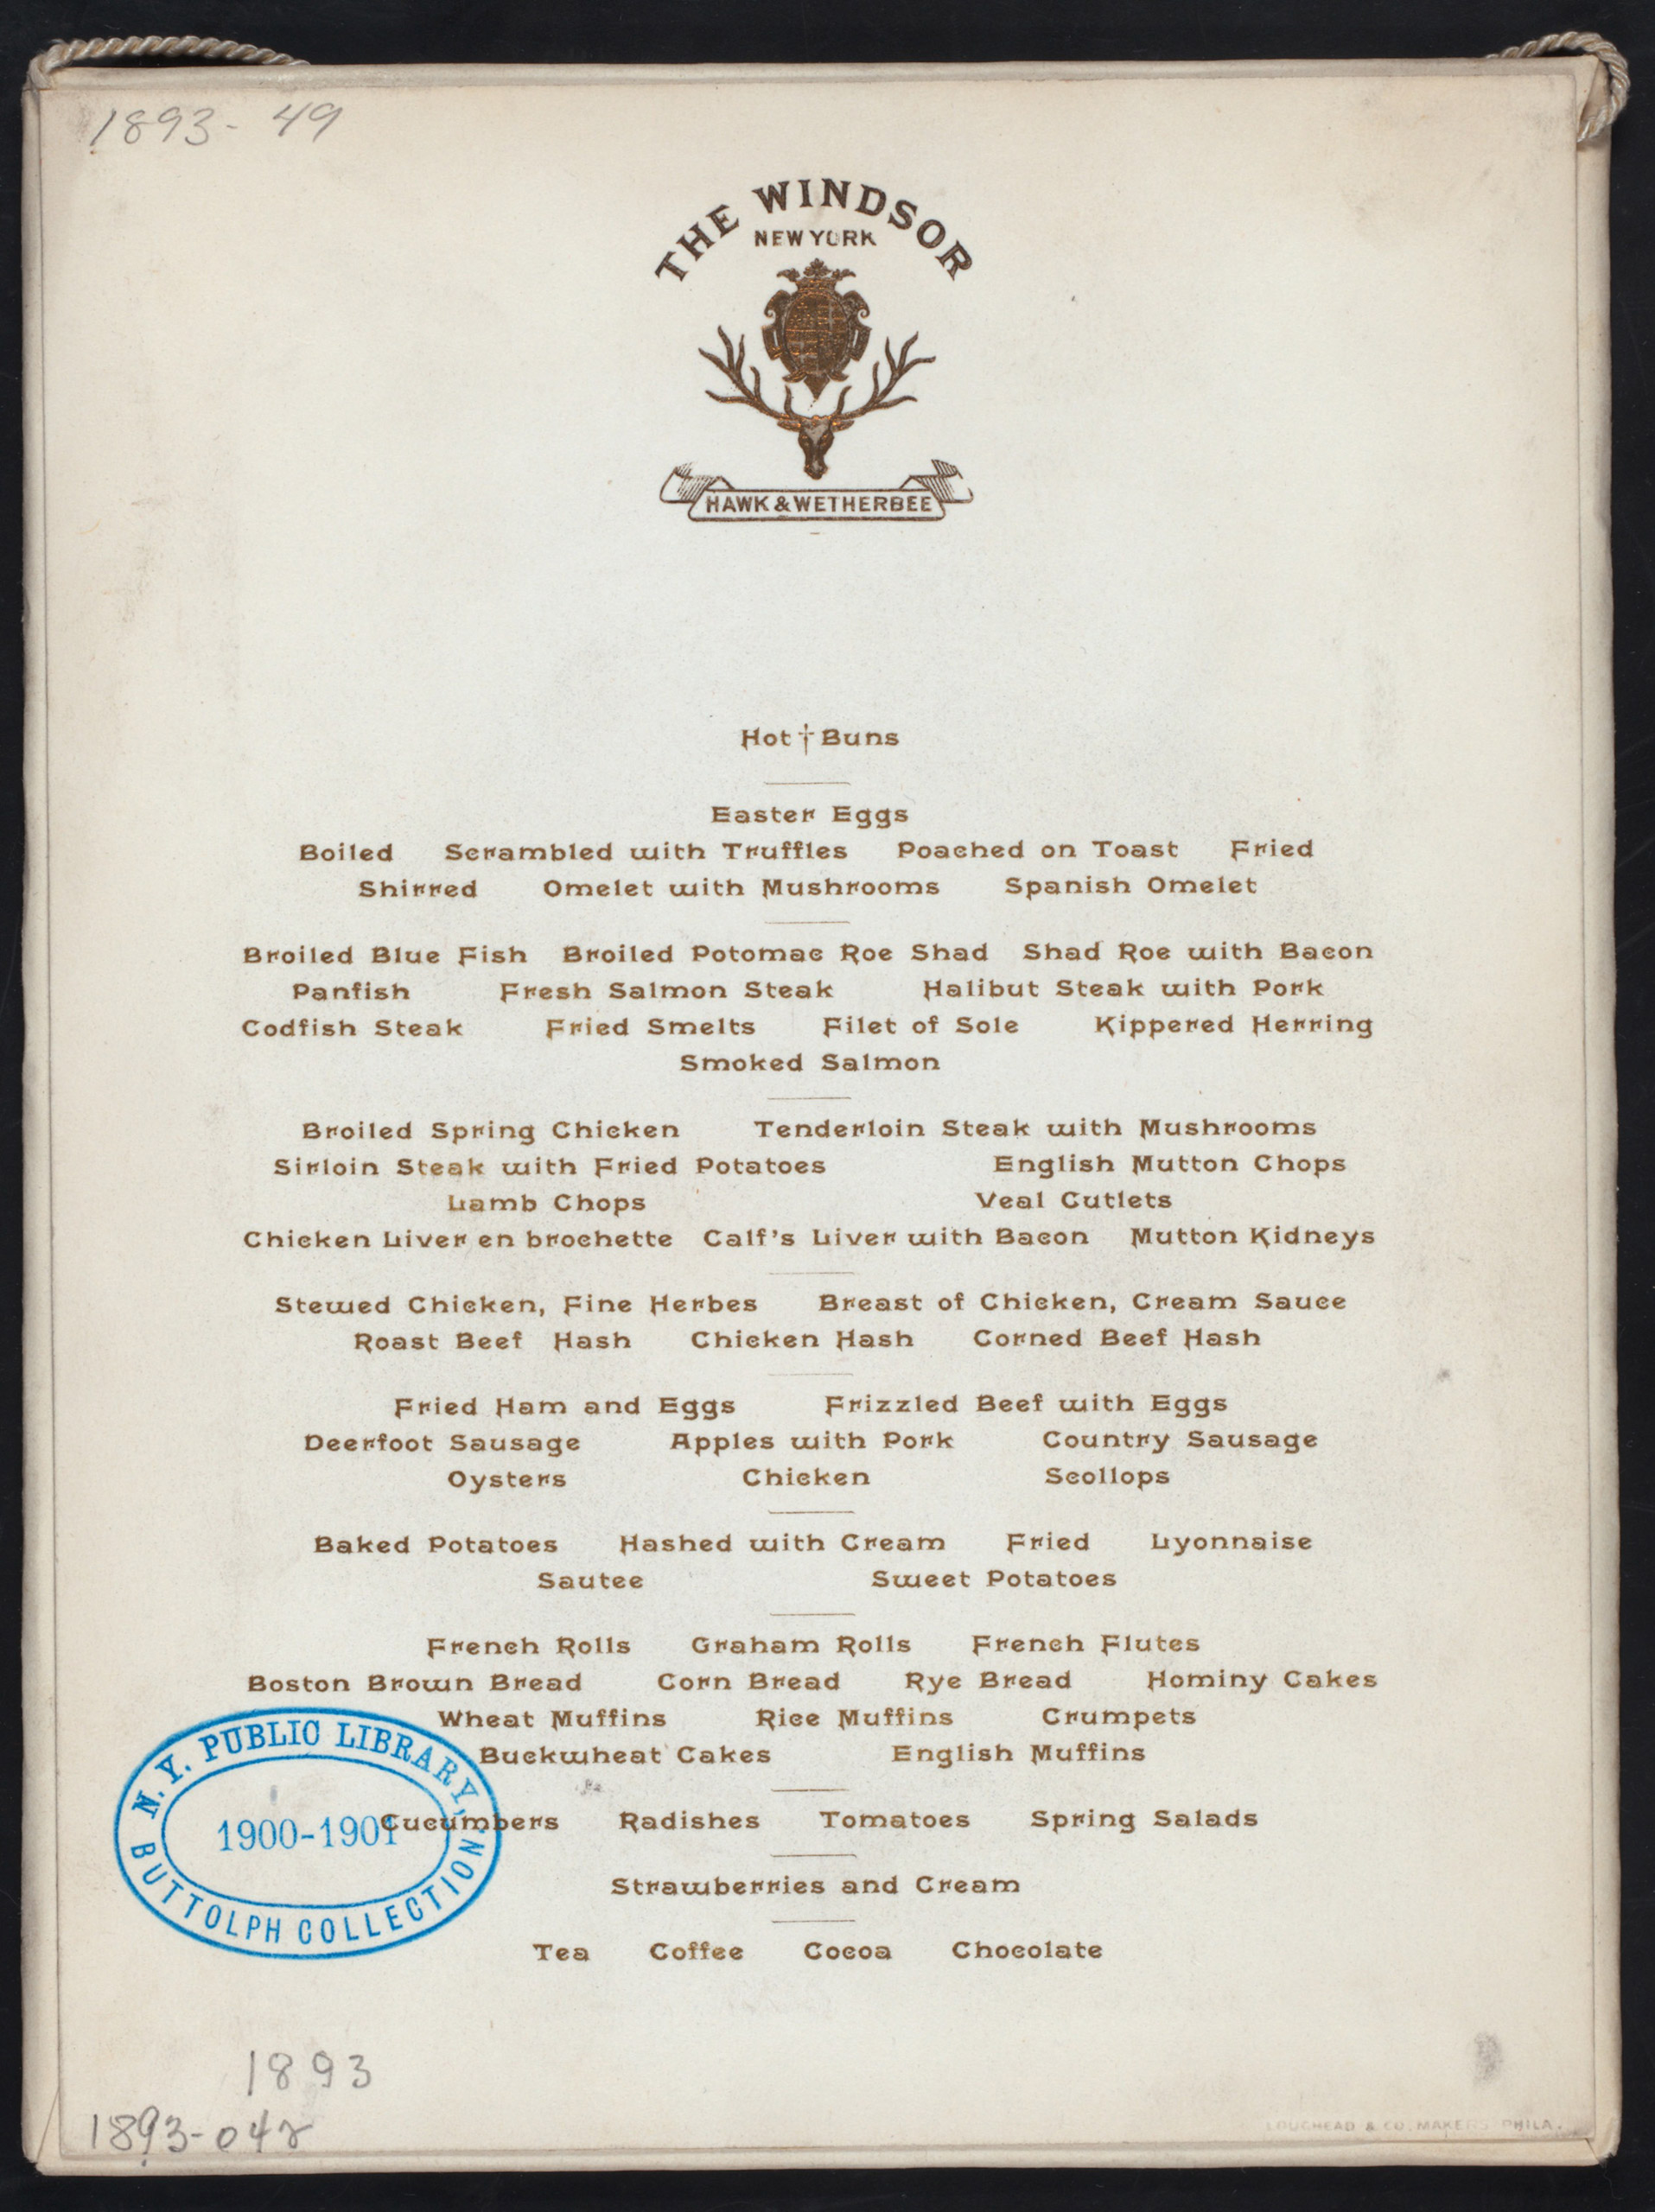 Easter dinner menu held at the Hawk &amp; Wetherbee at The Windsor in New York, NY. 1893. From the Buttolph collection of menus.